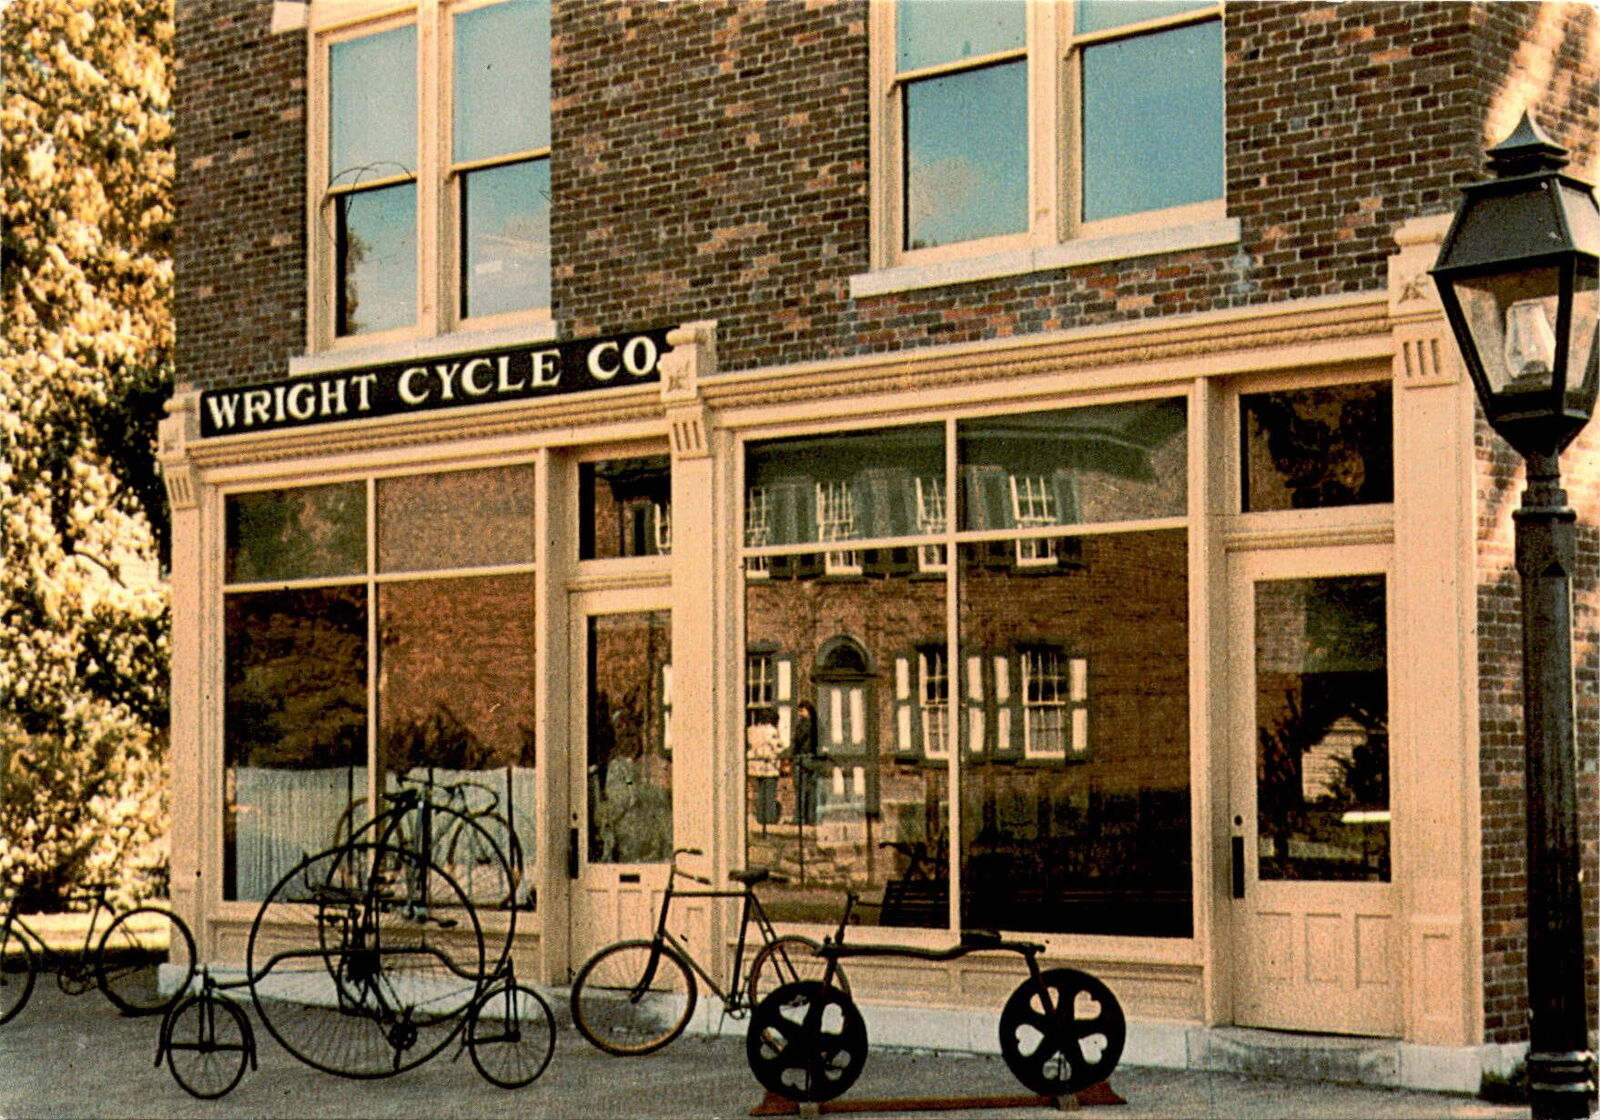 Wright Cycle Co Birthplace of Aviation Wright brothers Dayton OhioHenr postcard